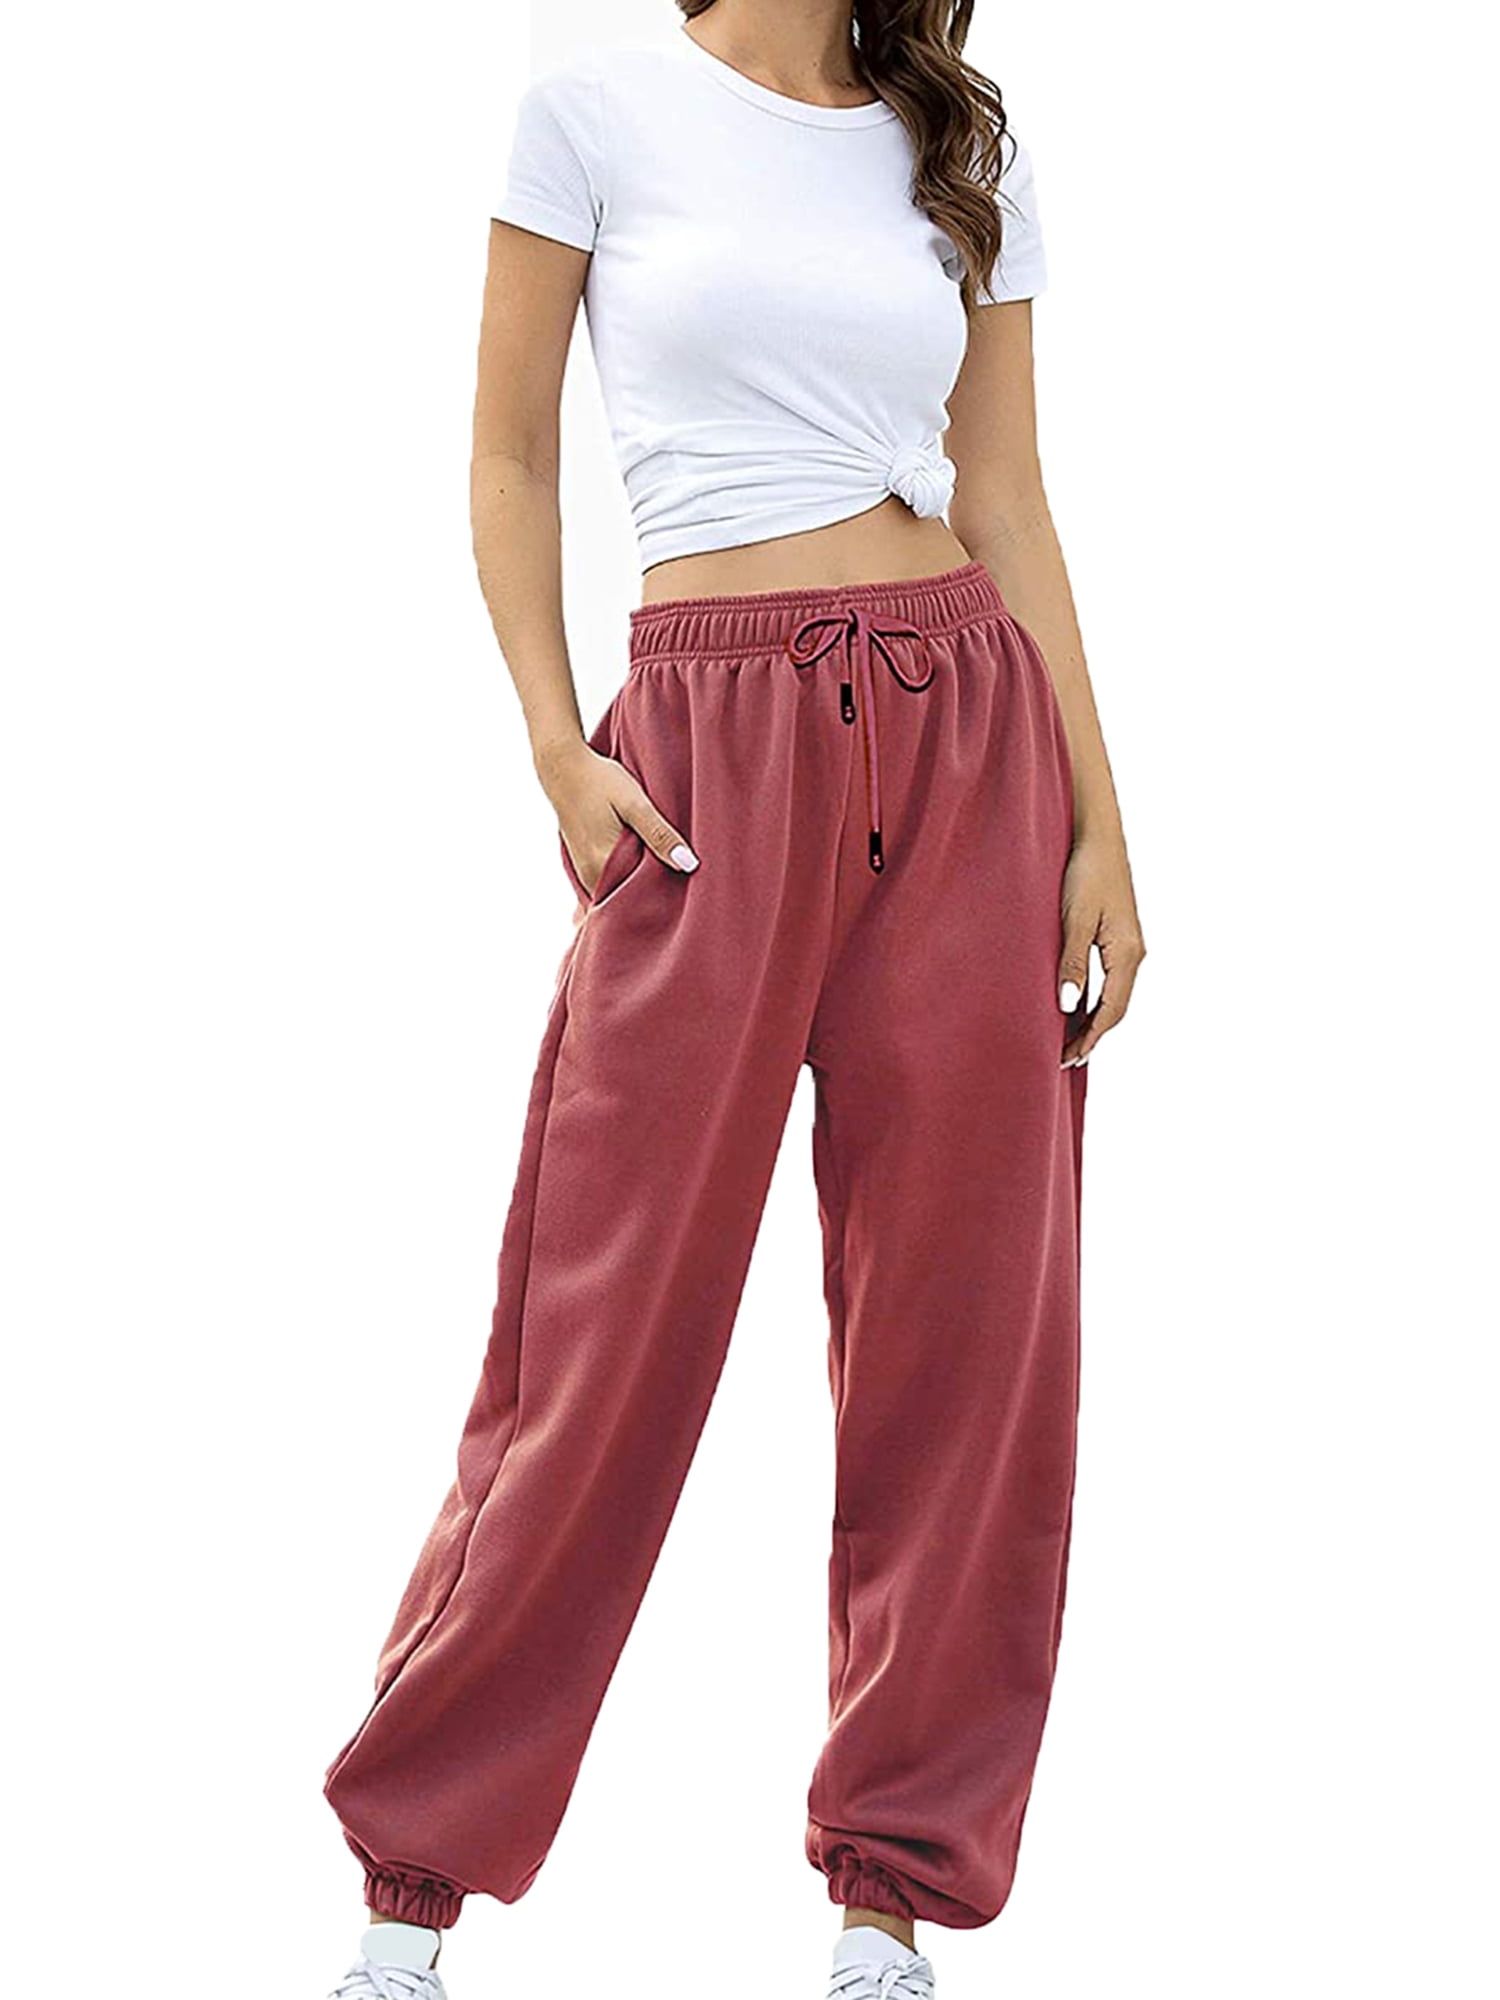 2 Pack Women's Sweatpants, High Waisted Soft Jogger Pants Athletic Cinch  Bottom Lounge Sweat Pants with Pockets